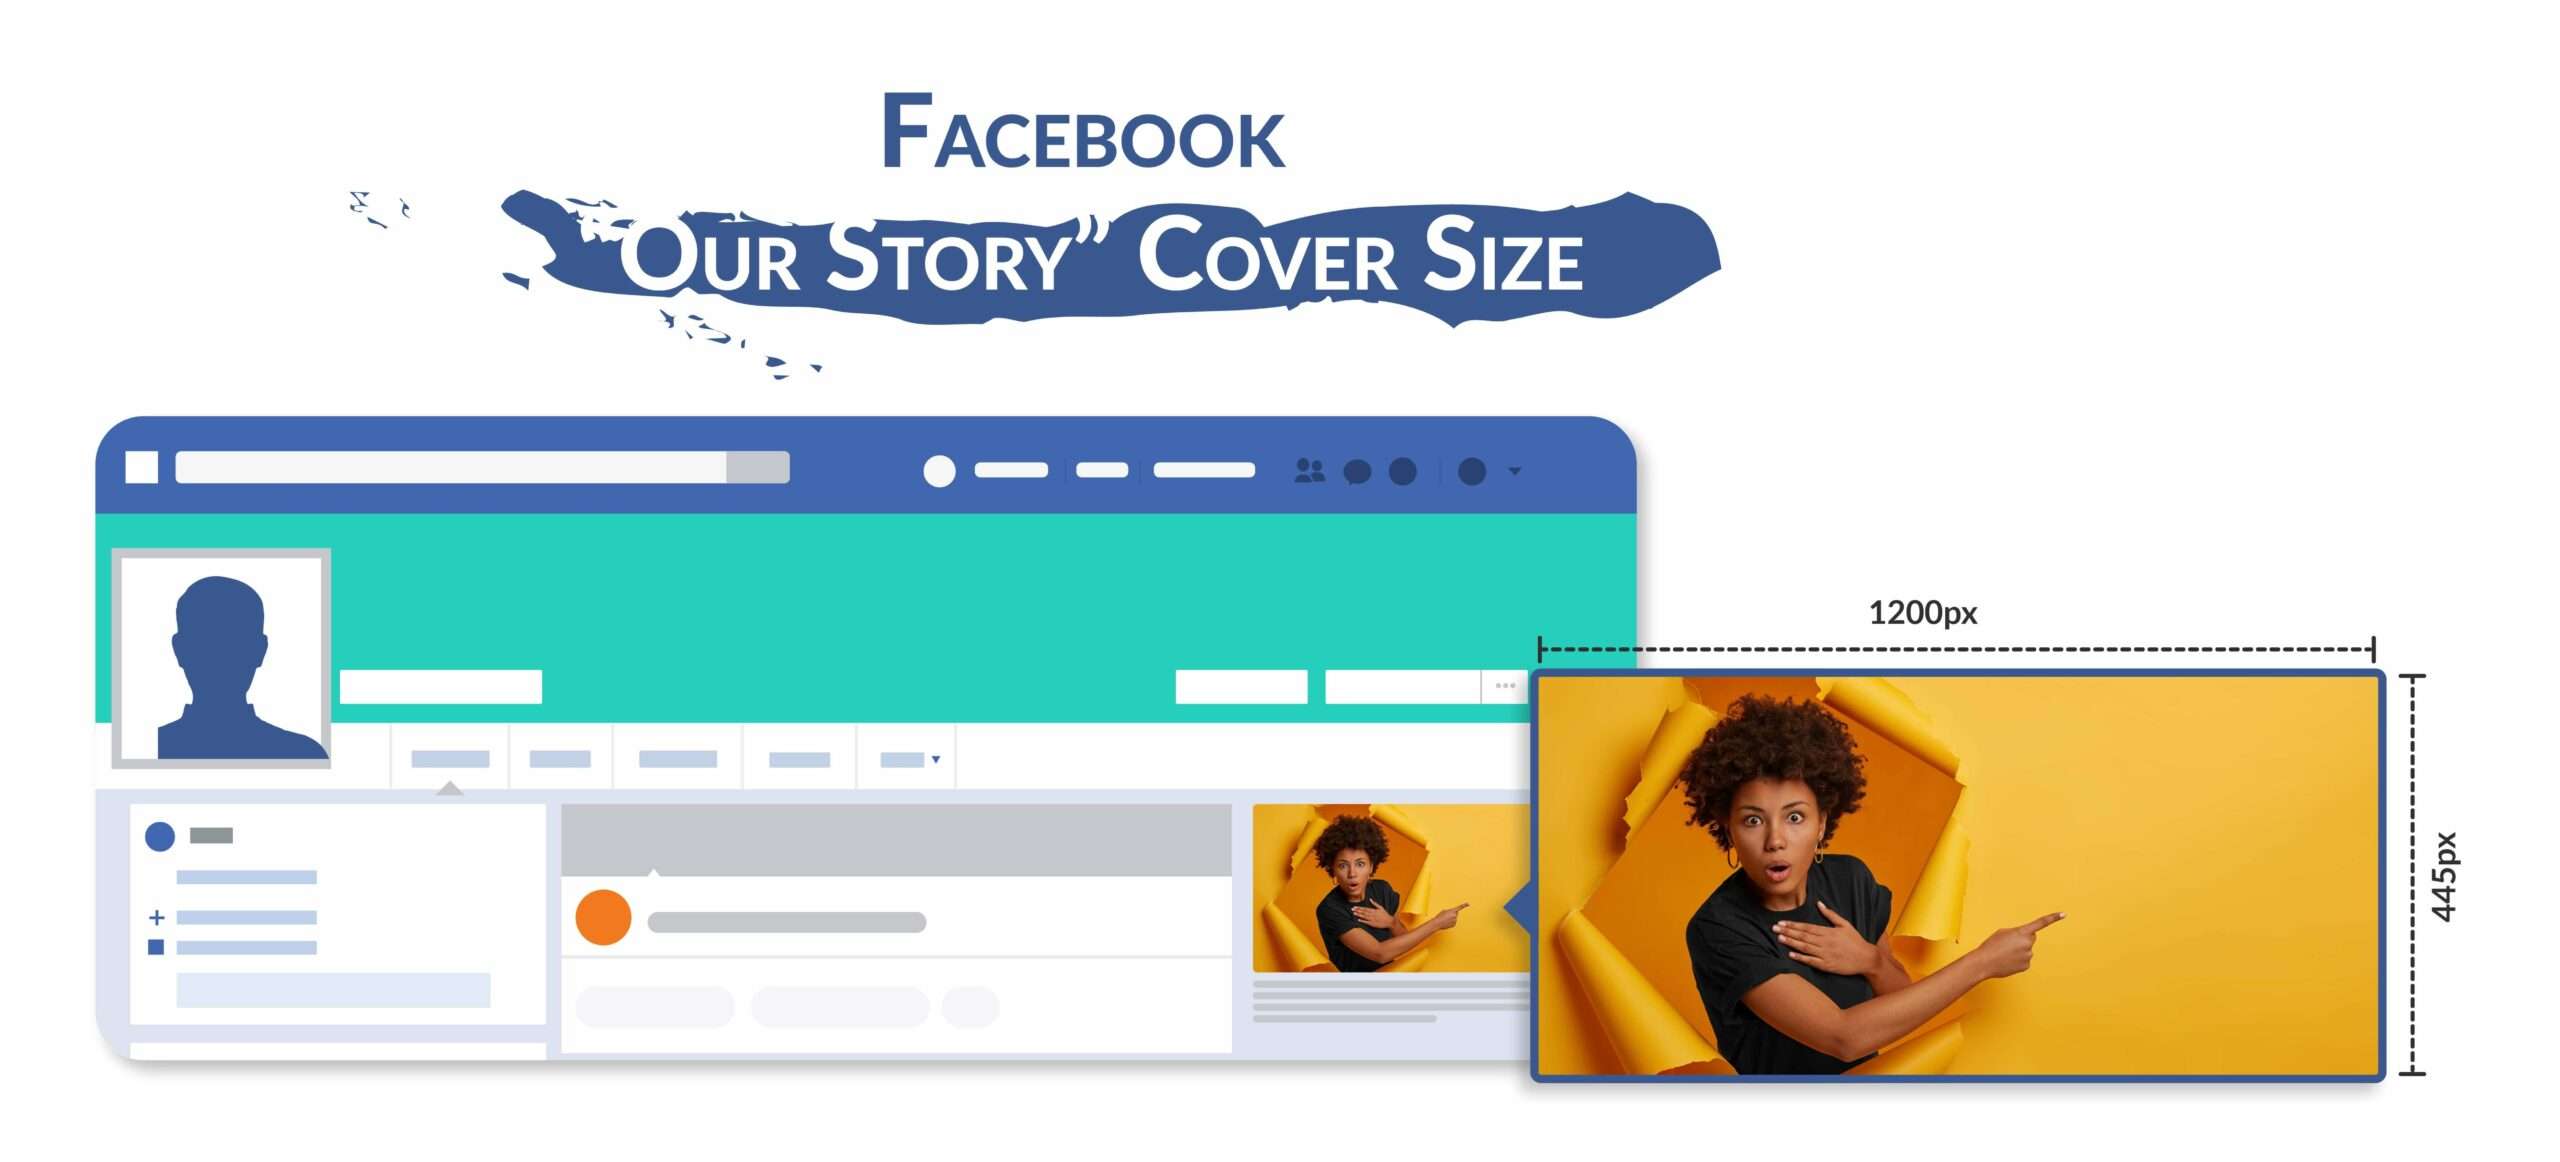 Facebook "Our Story" Sizes